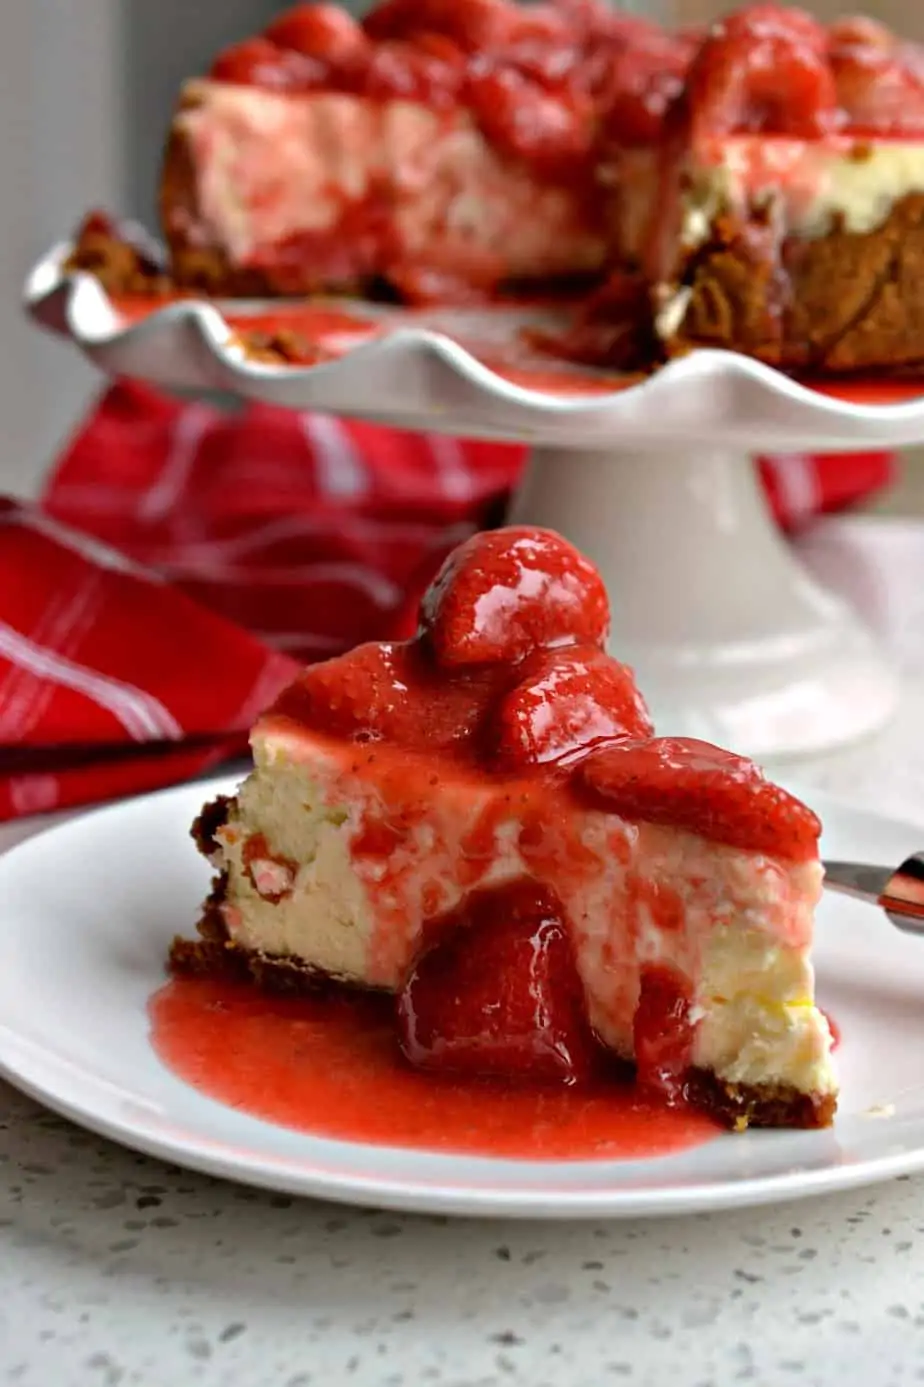 Delectable Strawberry Cheesecake is a cinch to make with a three ingredient graham cracker crust and fresh strawberry sauce.